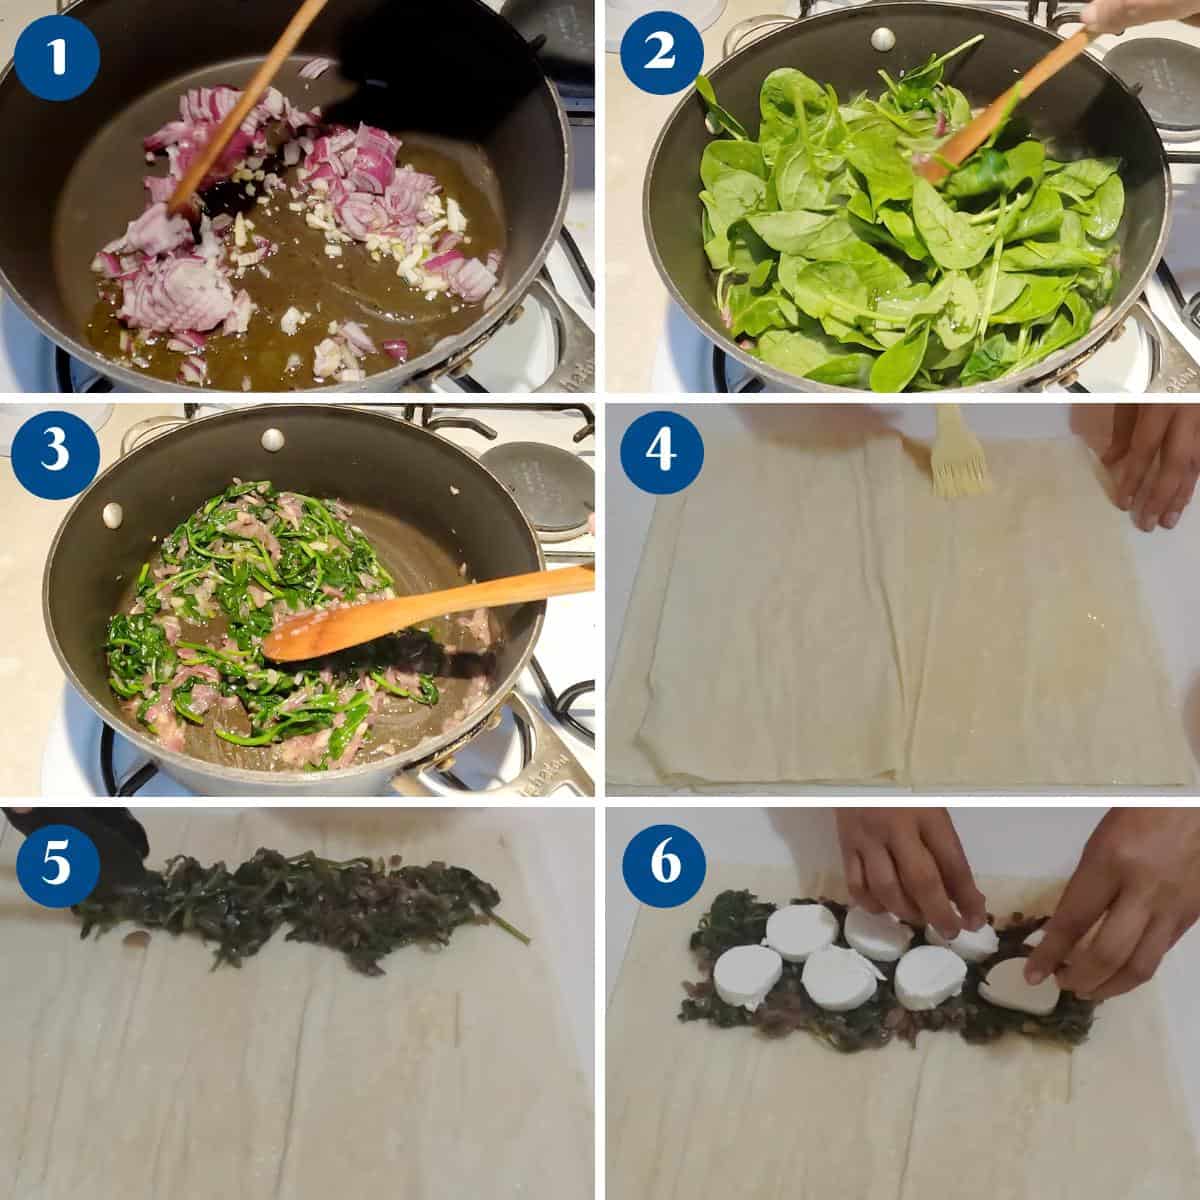 Progress pictures for sautéing spinach in fry pan.